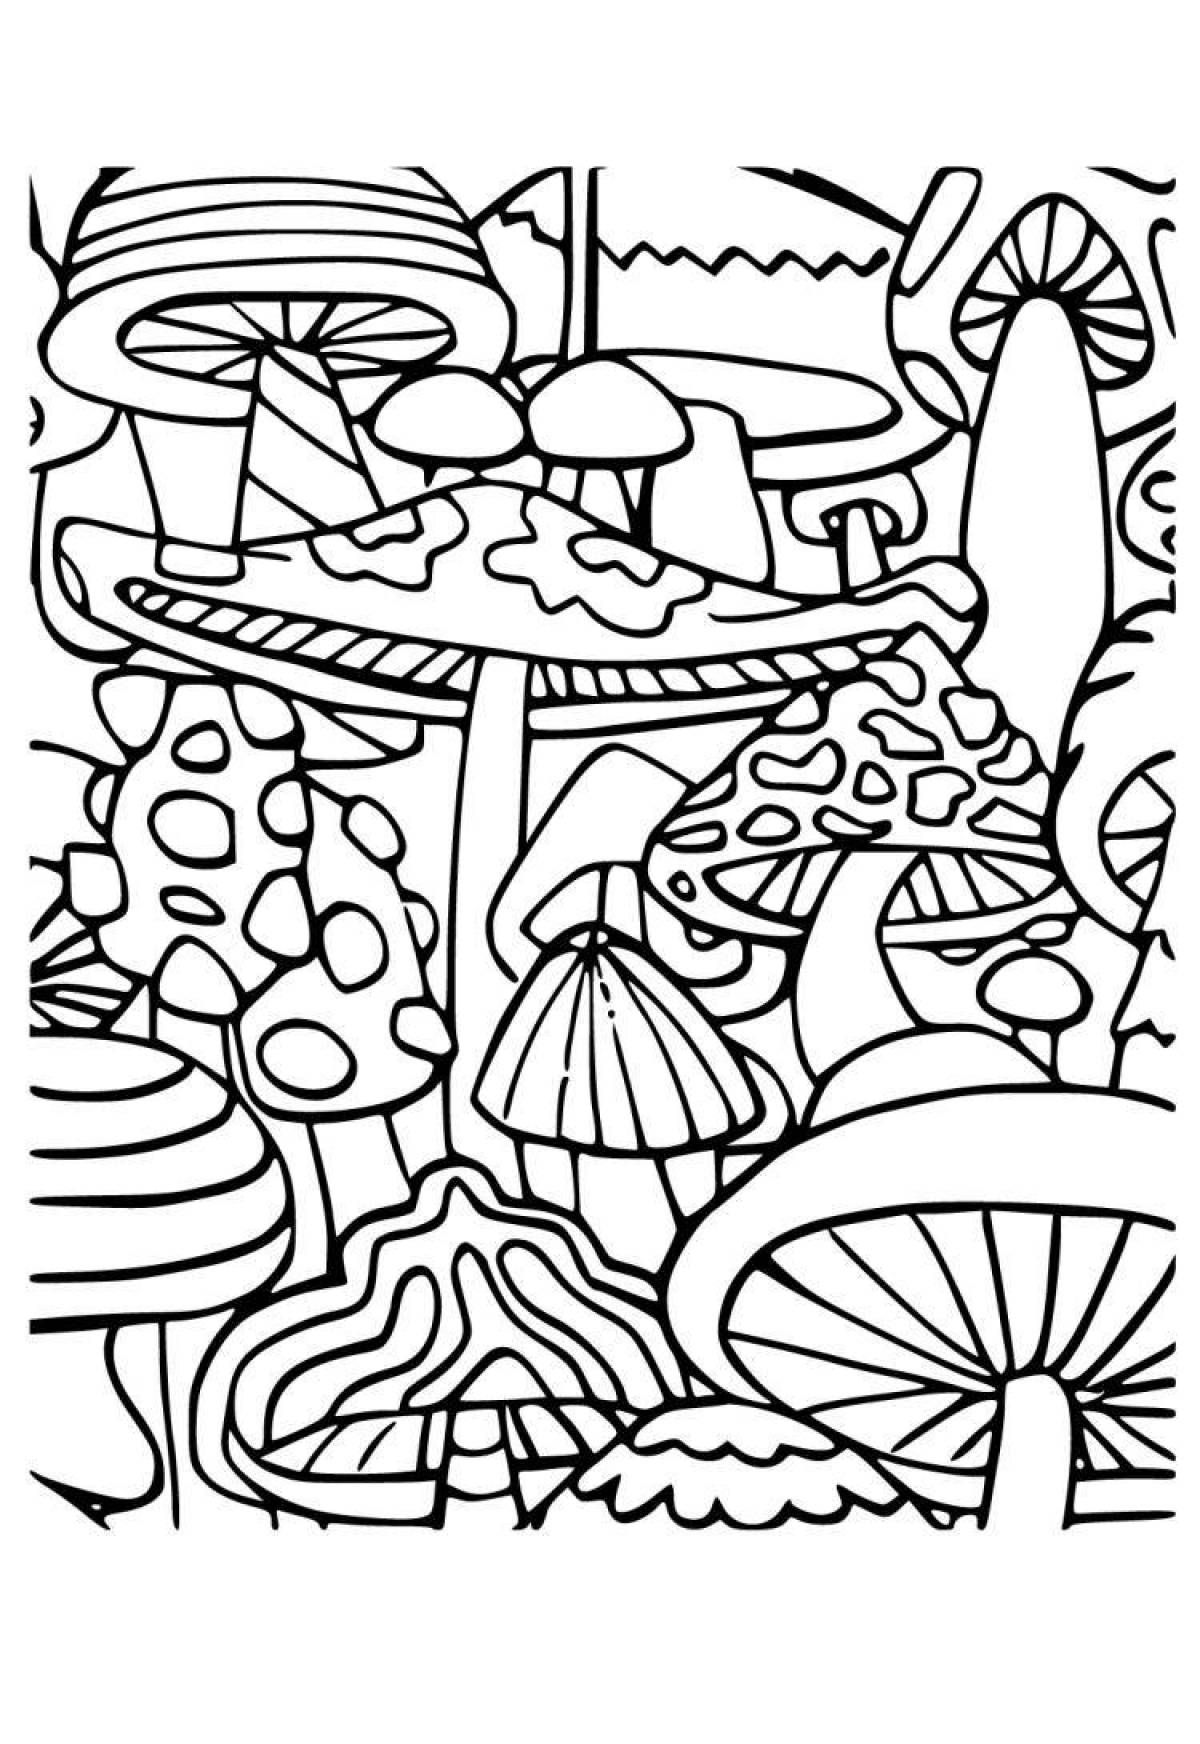 Funky hippie coloring book